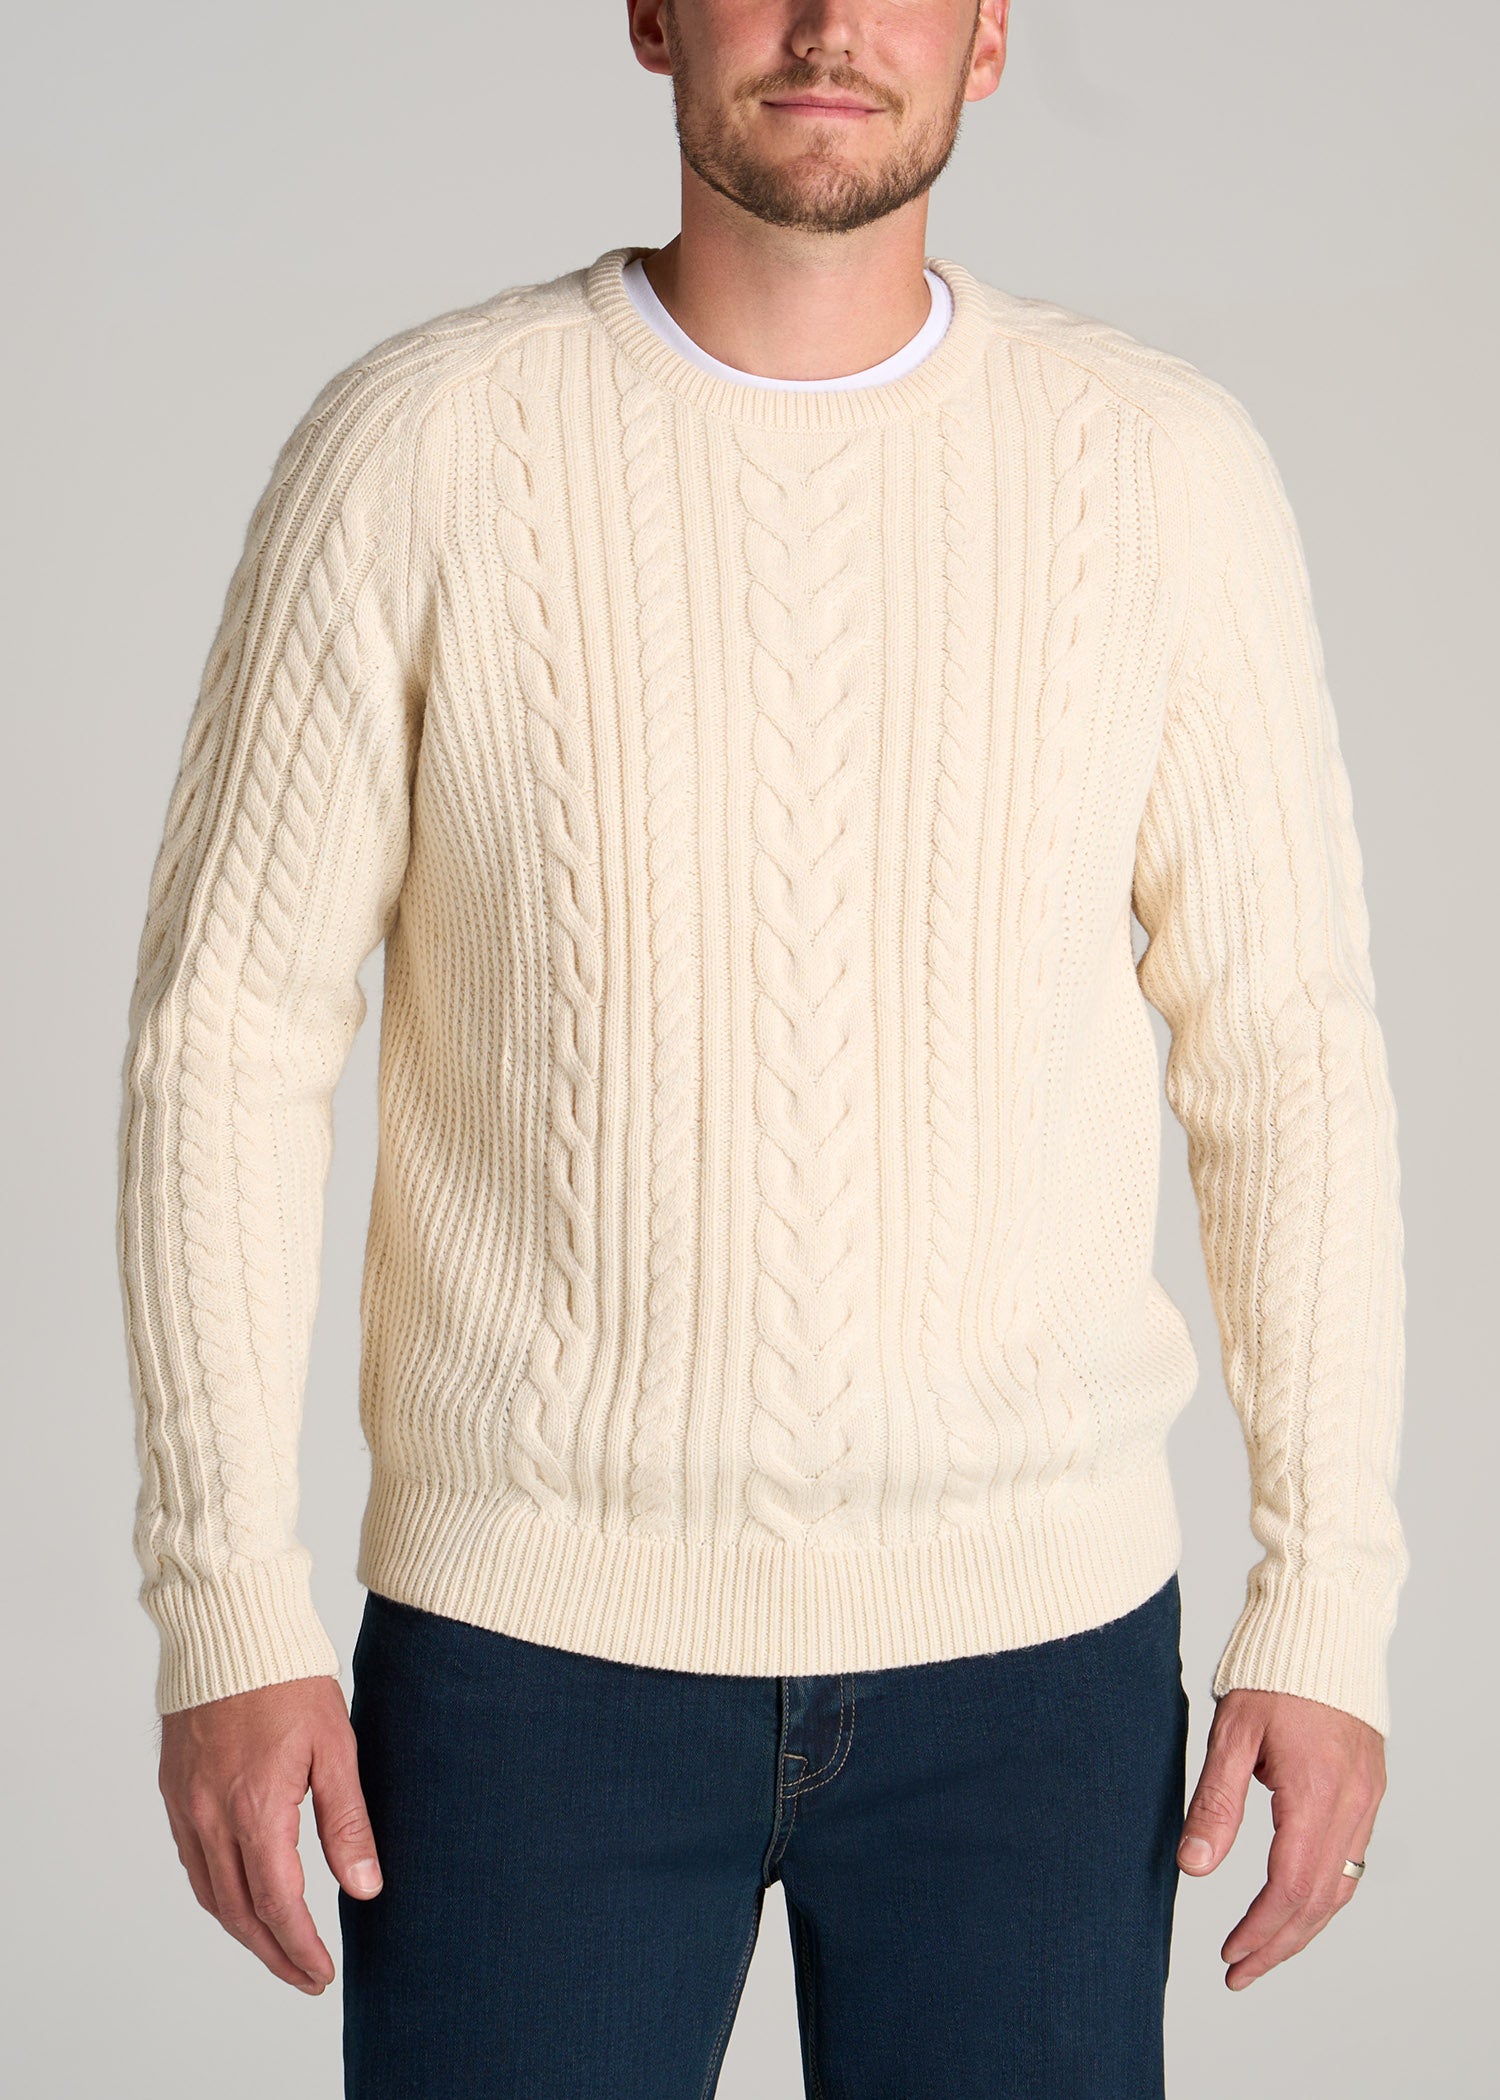 Heavy Cable Knit Tall Men's Sweater in Almond